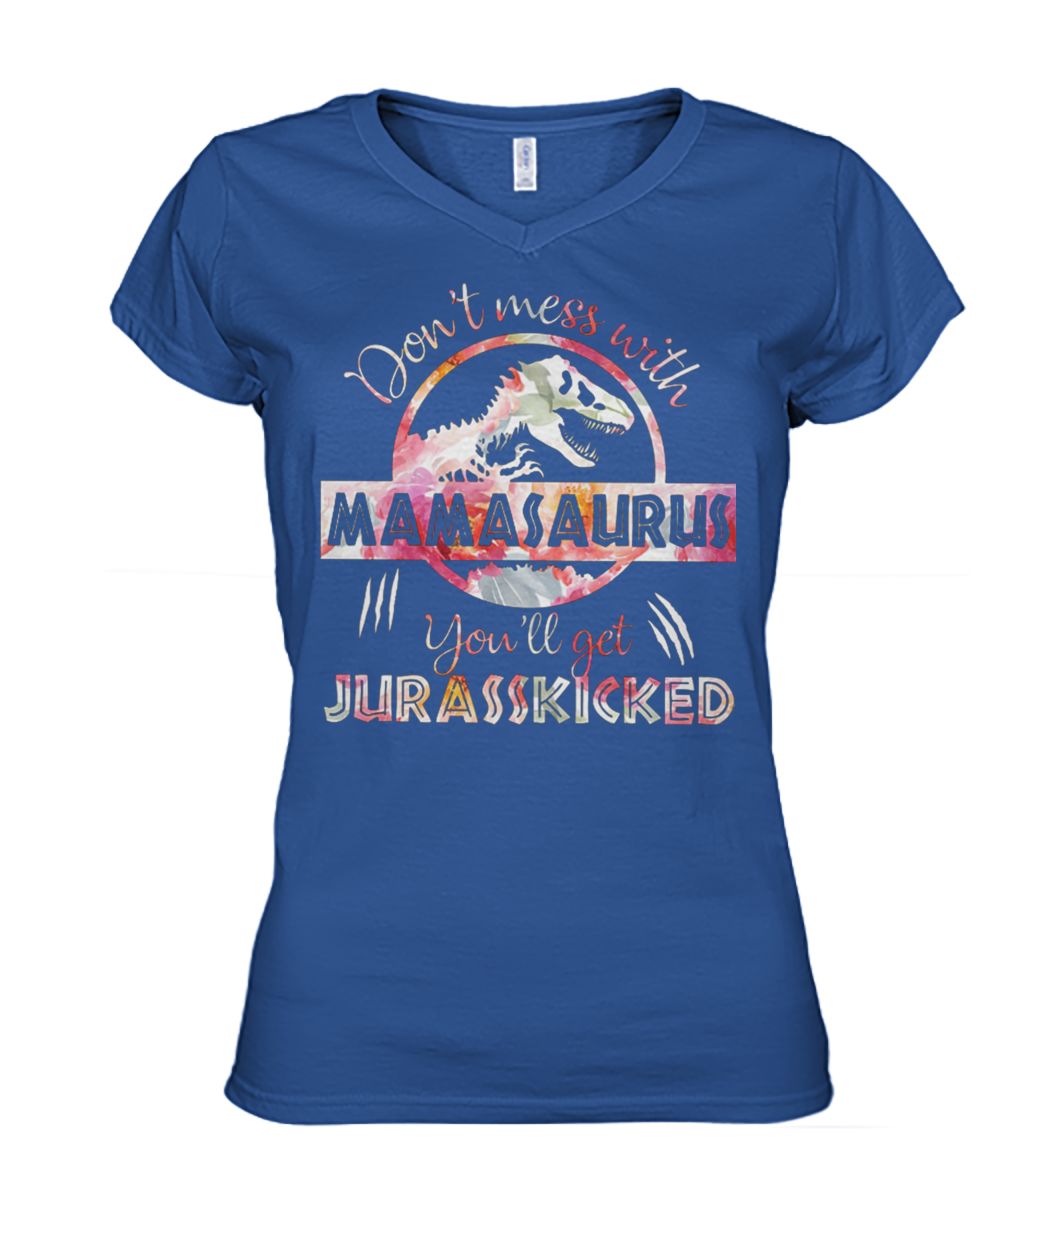 Don't mess with mamasaurus you'll get jurasskicked floral women's v-neck